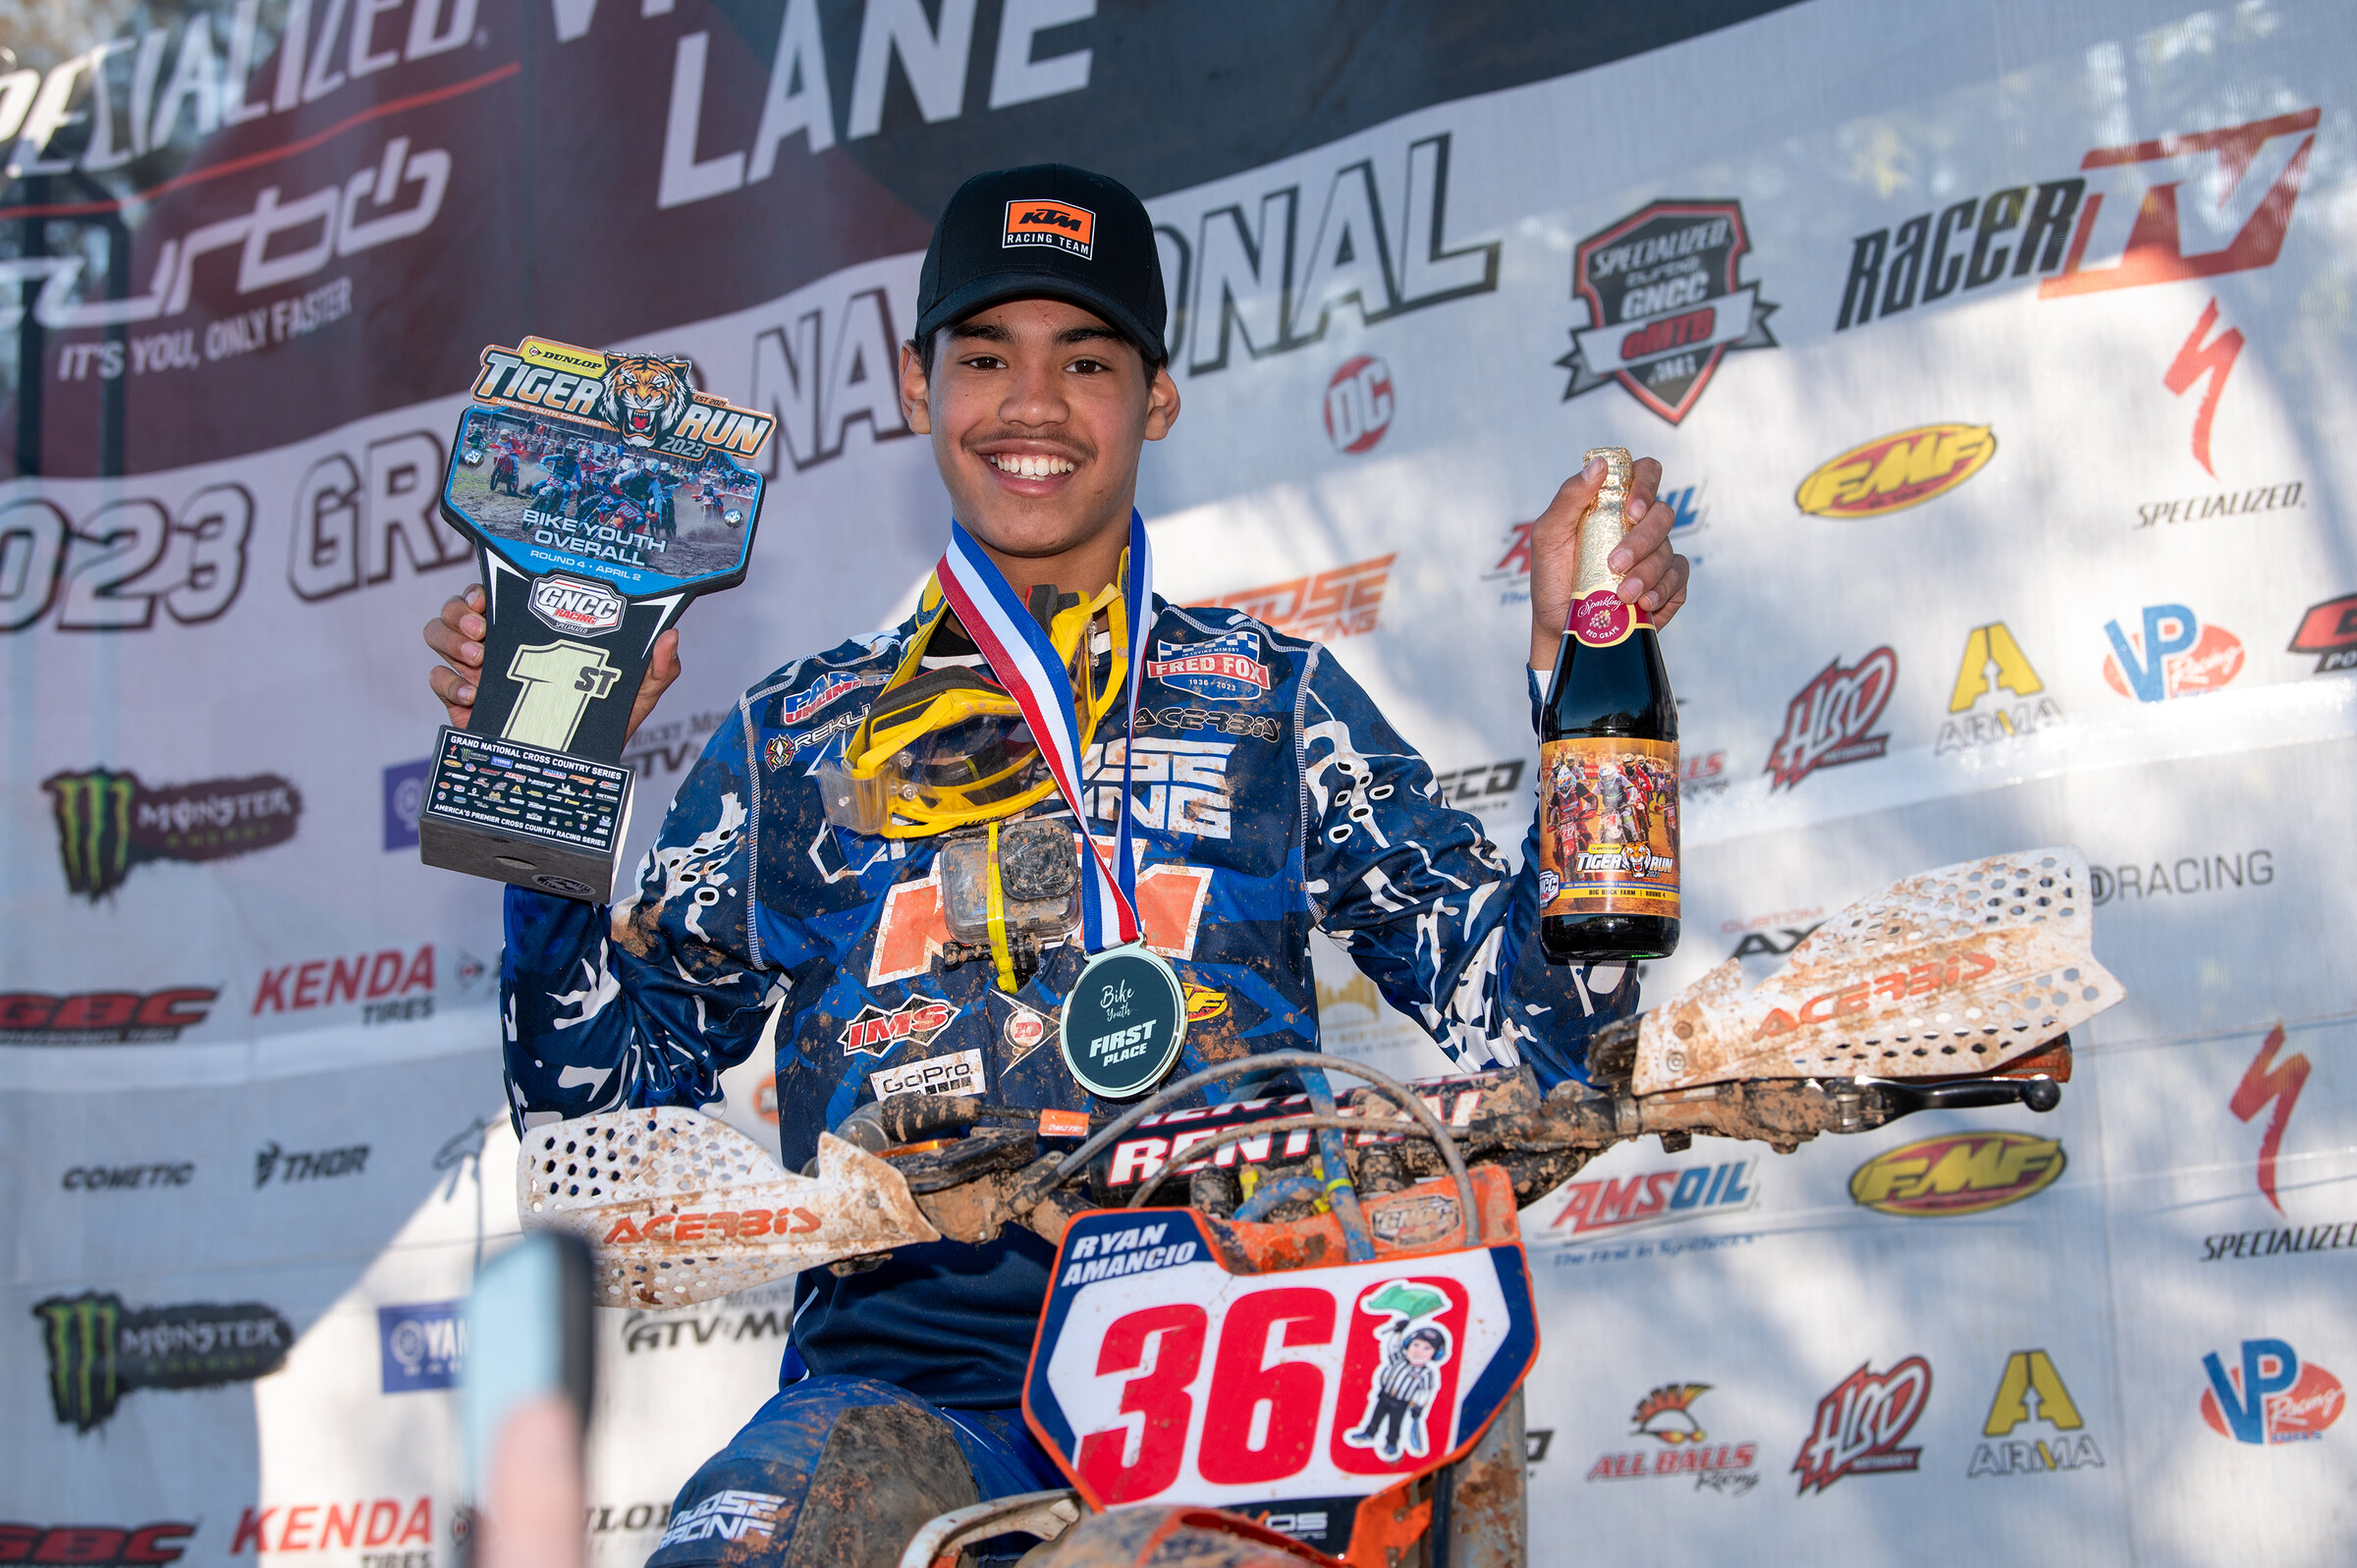 Ryan Amancio grabbed his second youth overall win of the season.